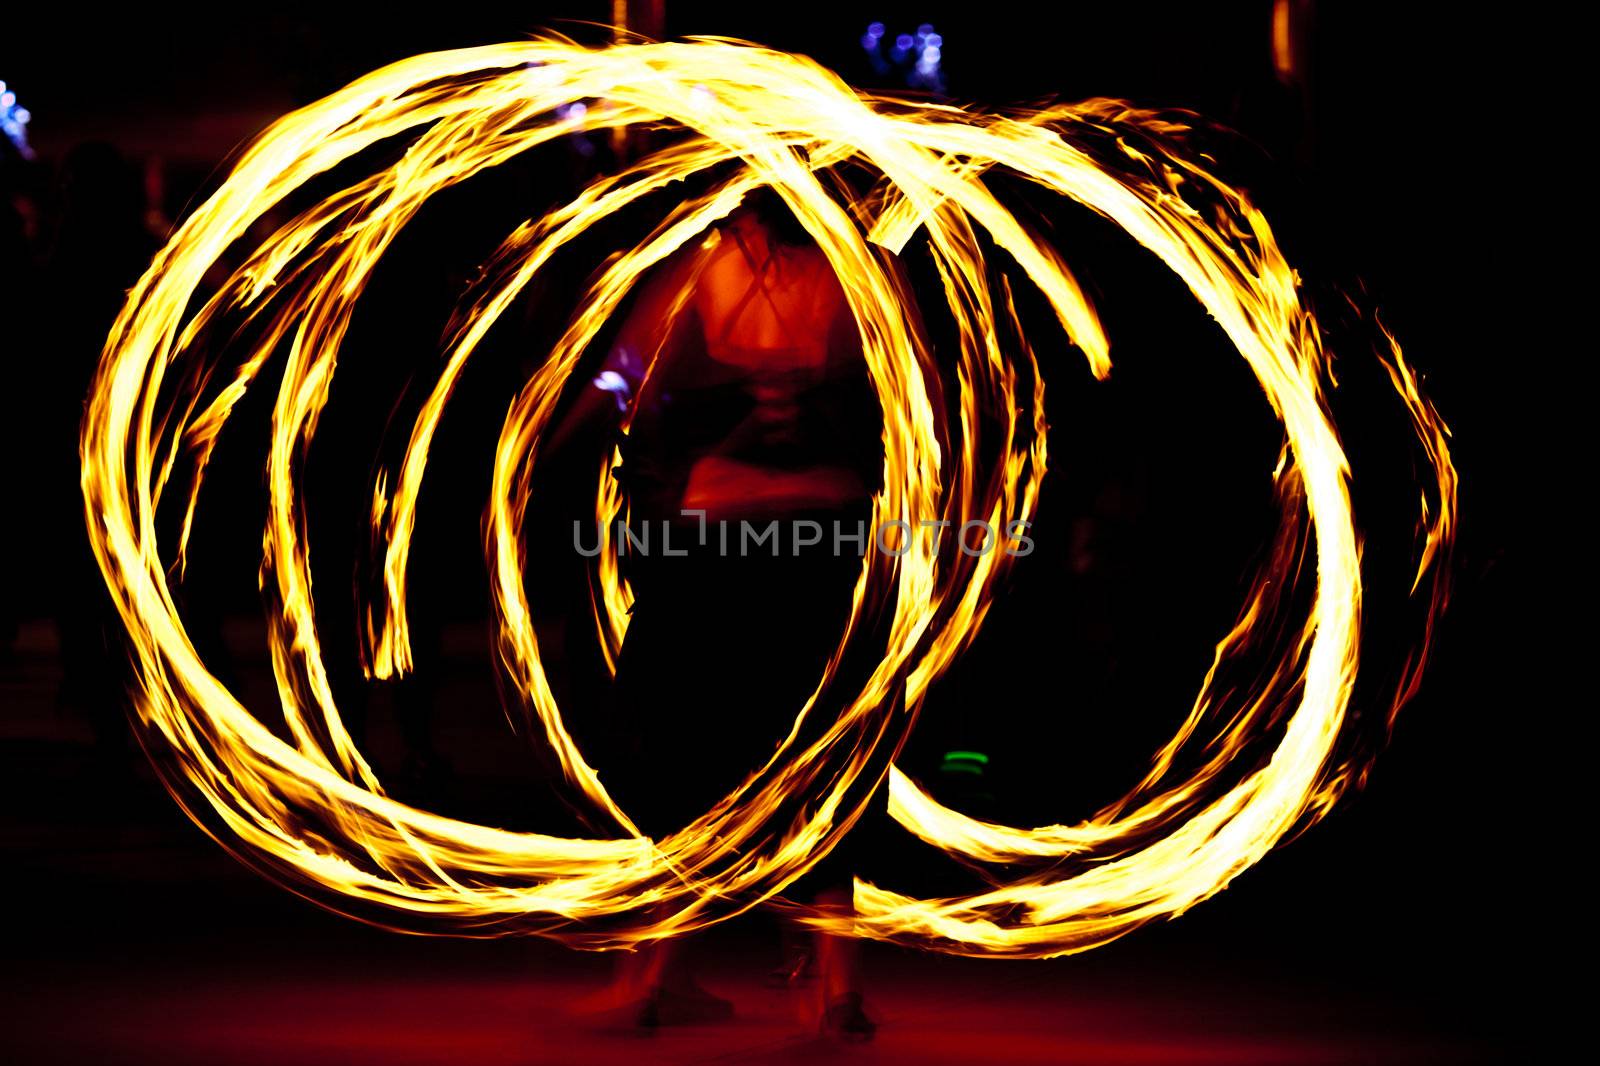 Fire dancer at night turning torch